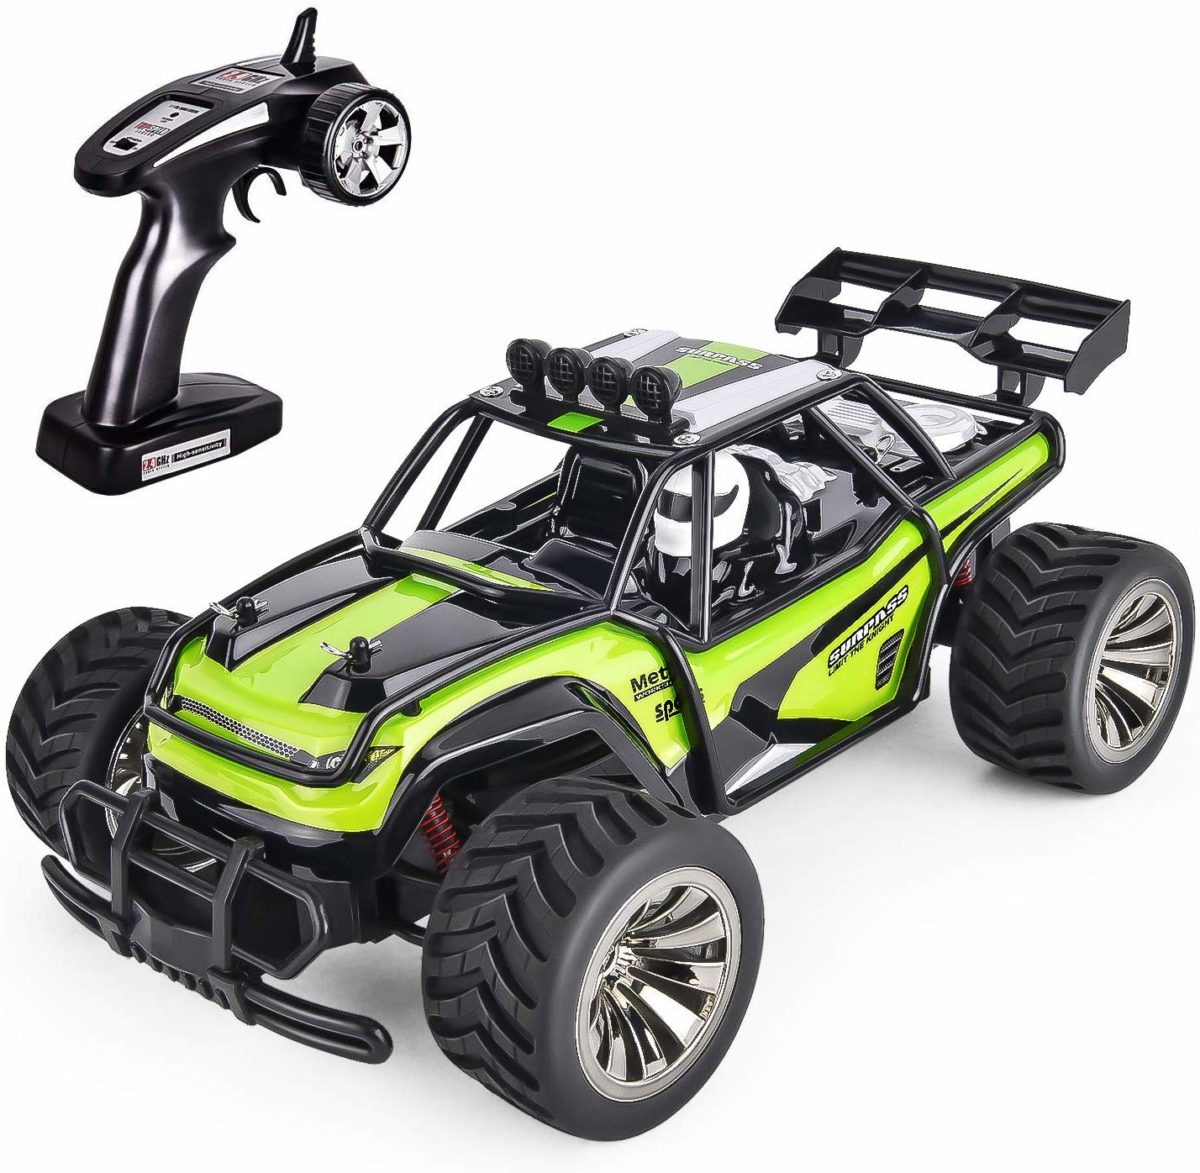 GotechoD High Speed Remote Control Car - Top Toys and Gifts for Six Year Old Boys 1